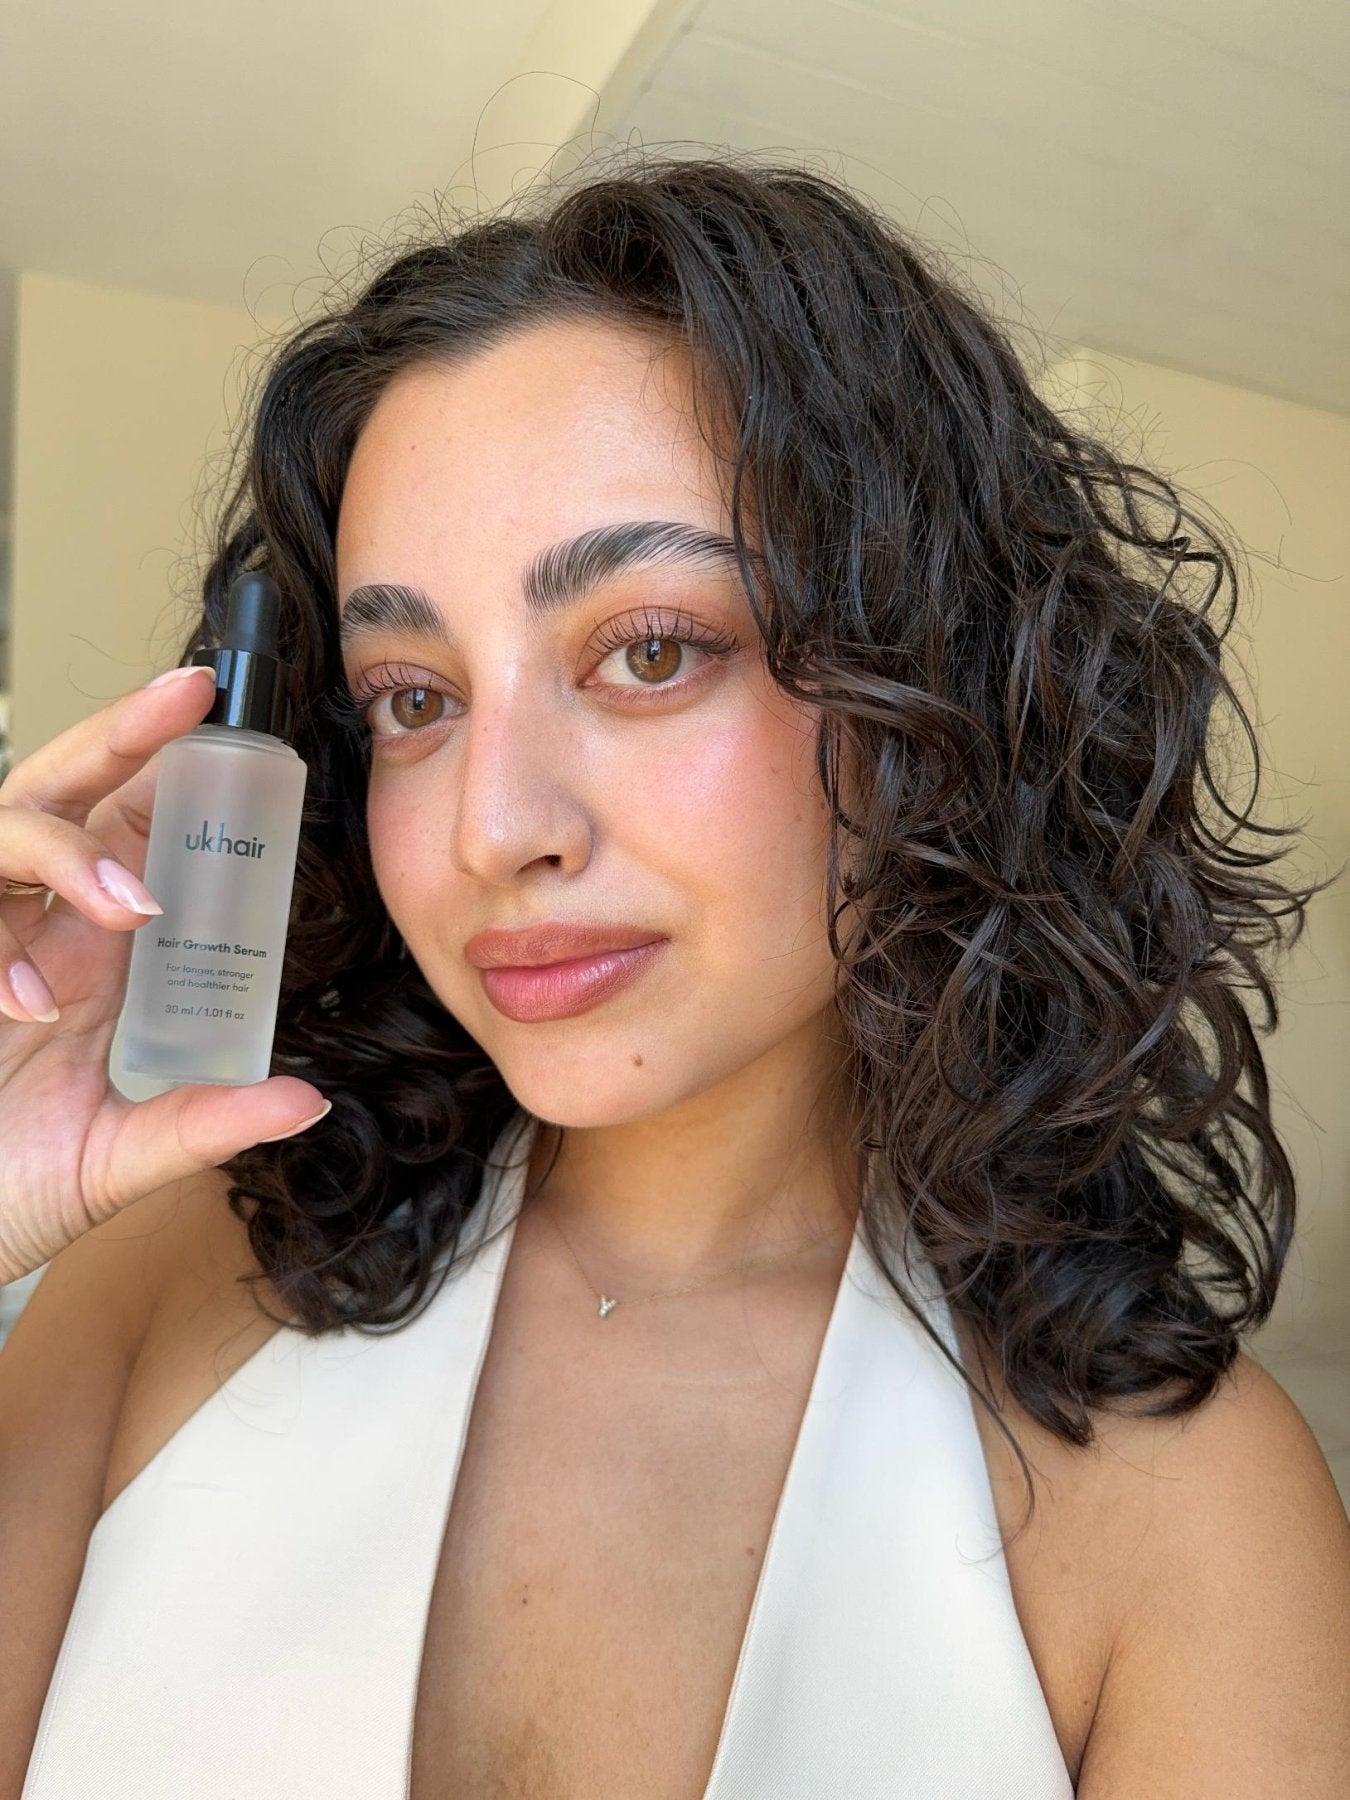 What Is Hair Growth Serum And How Does It Work? - UKLASH